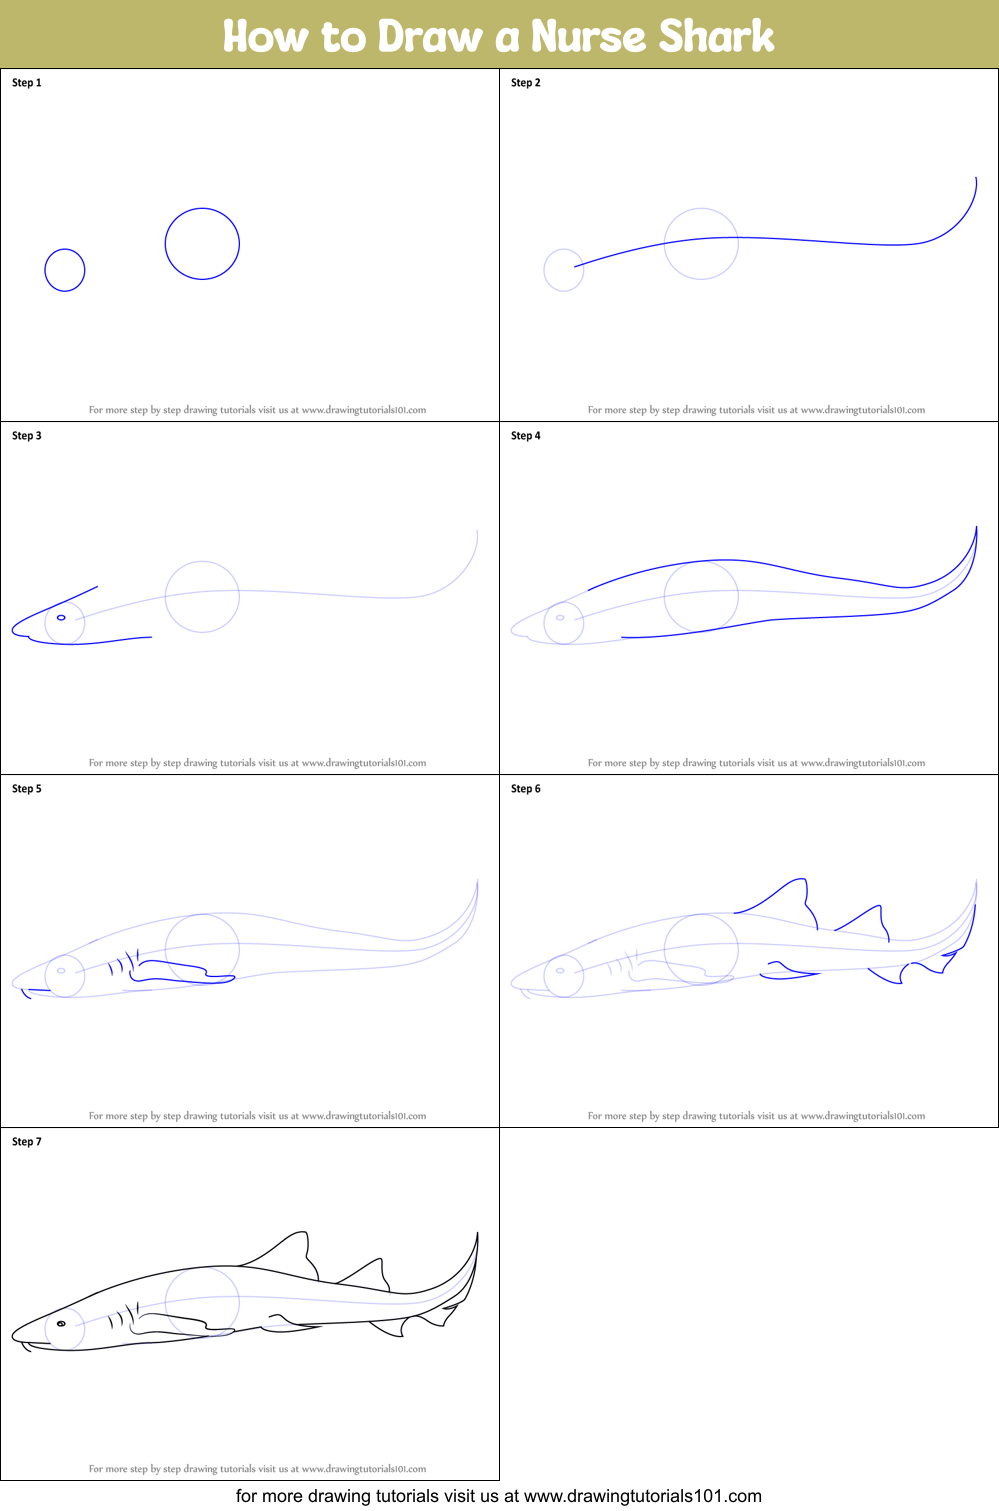 How to Draw a Nurse Shark printable step by step drawing sheet